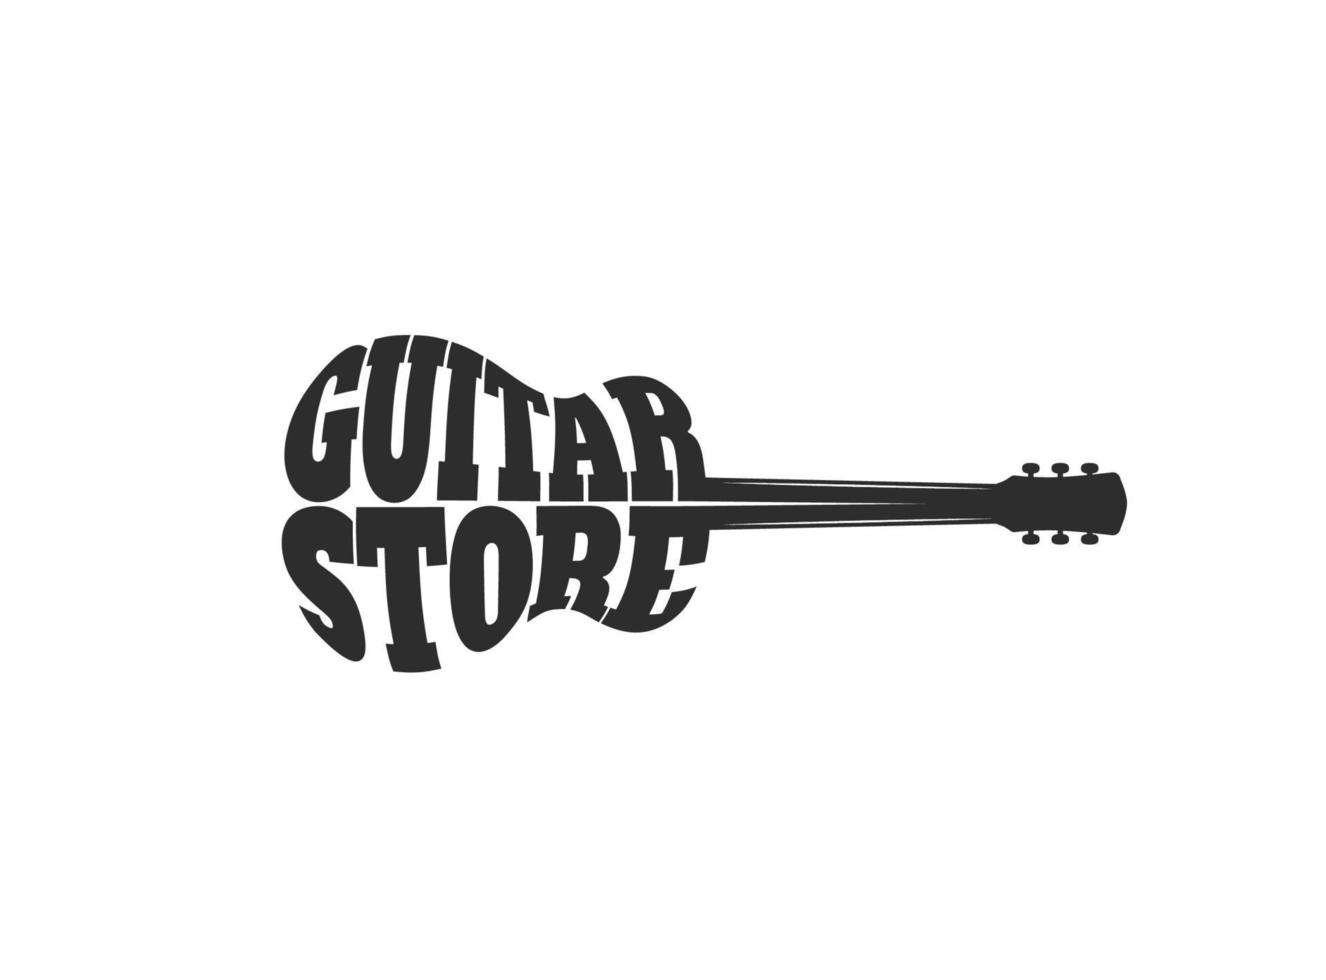 Guitar music instrument shop abstract icon vector